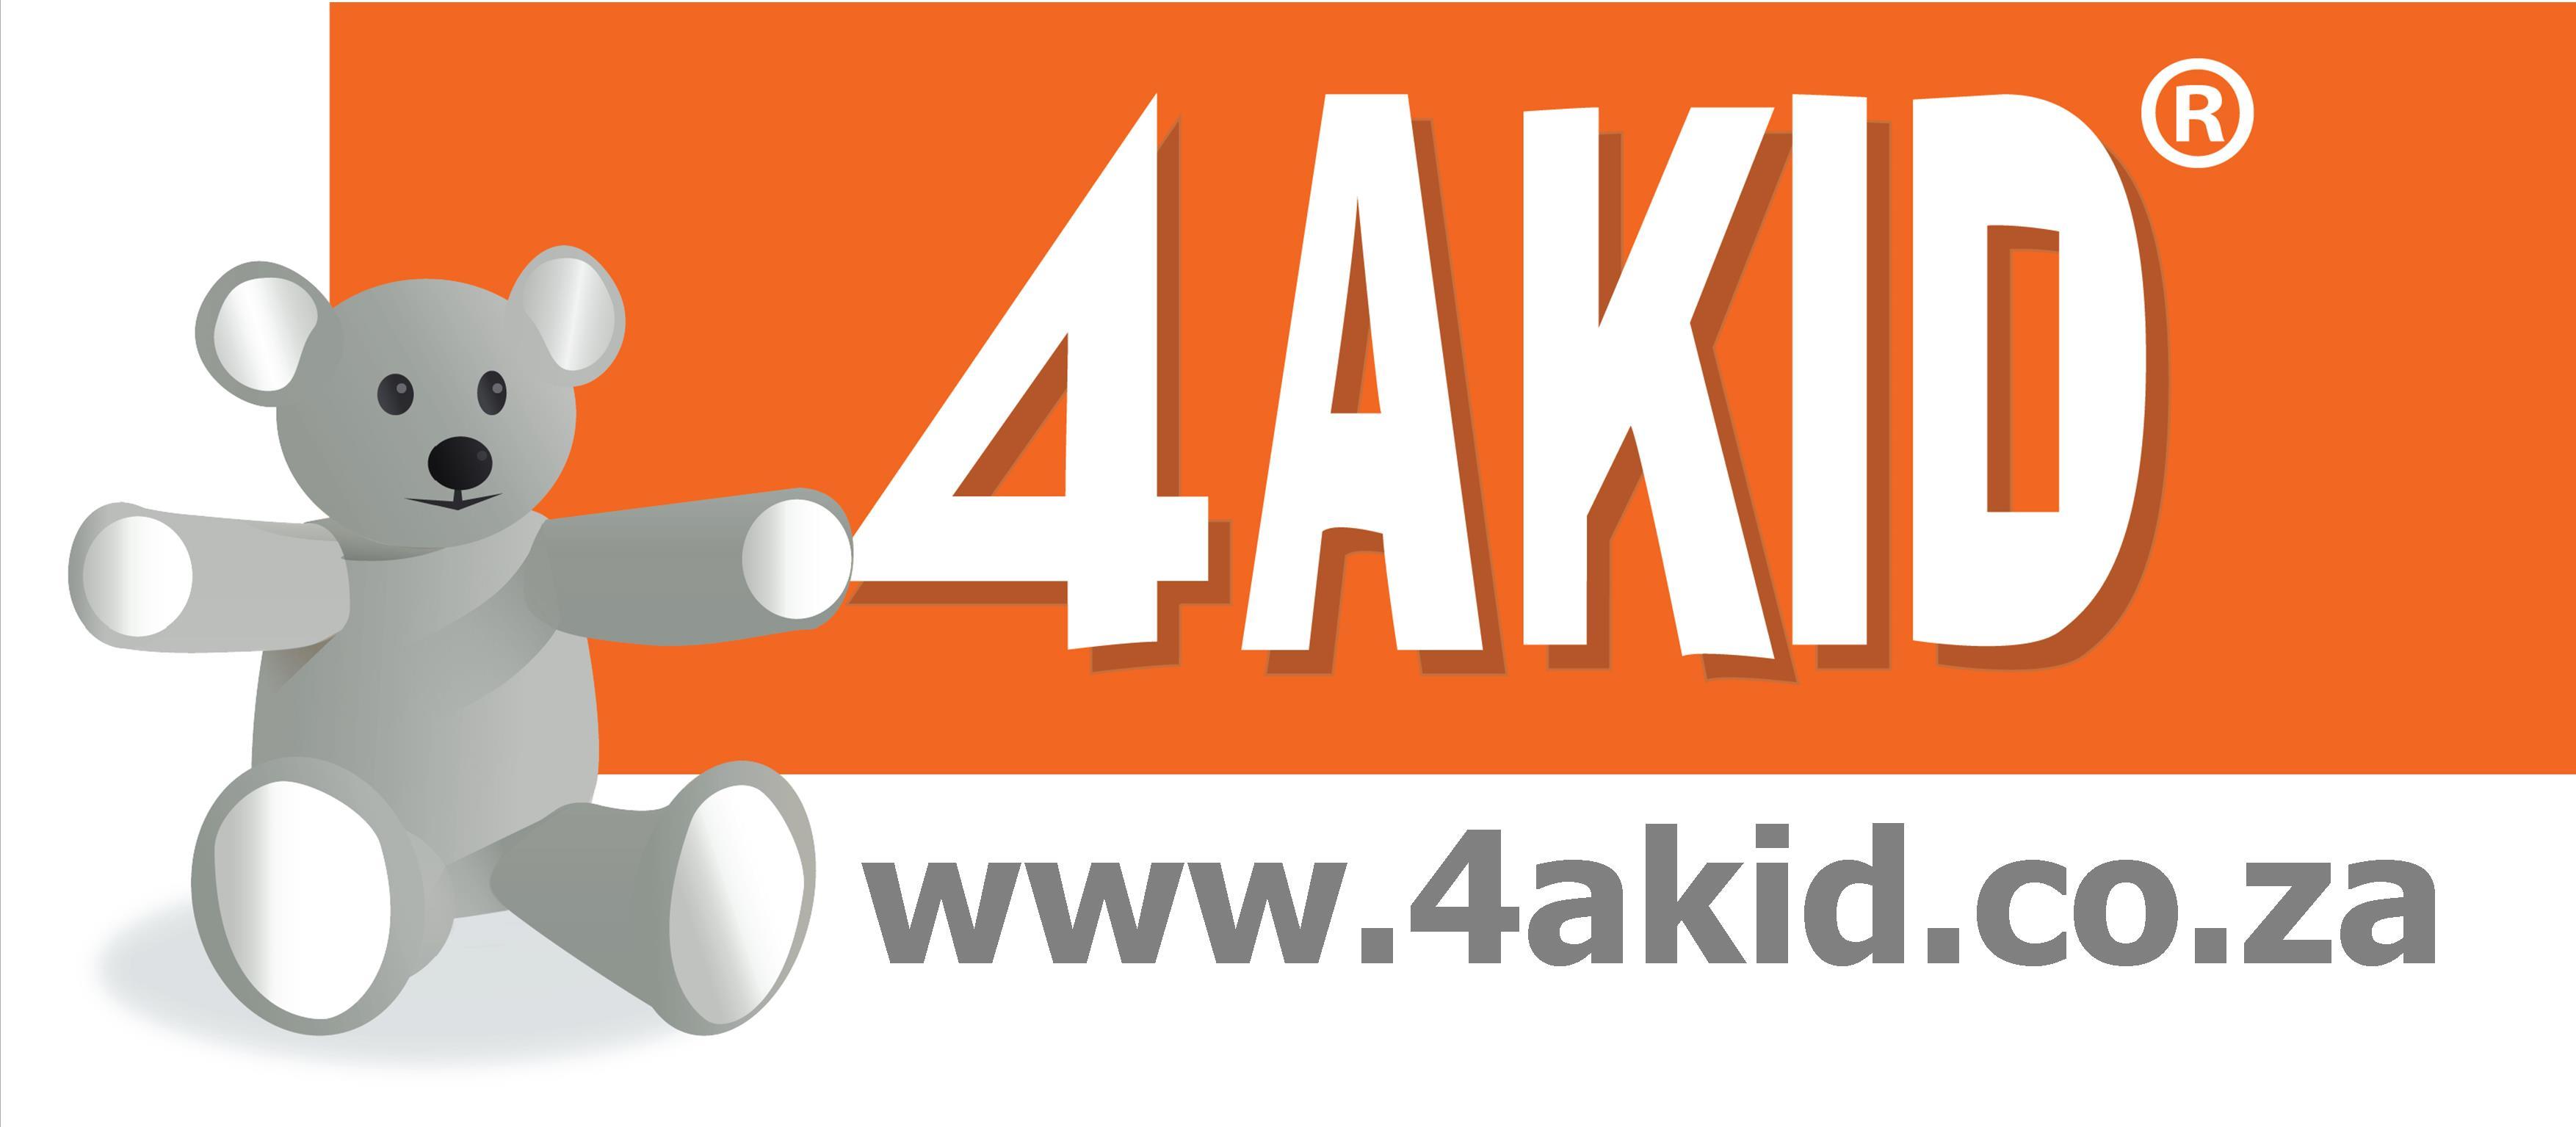 4aKid Launches New Website - 4aKid